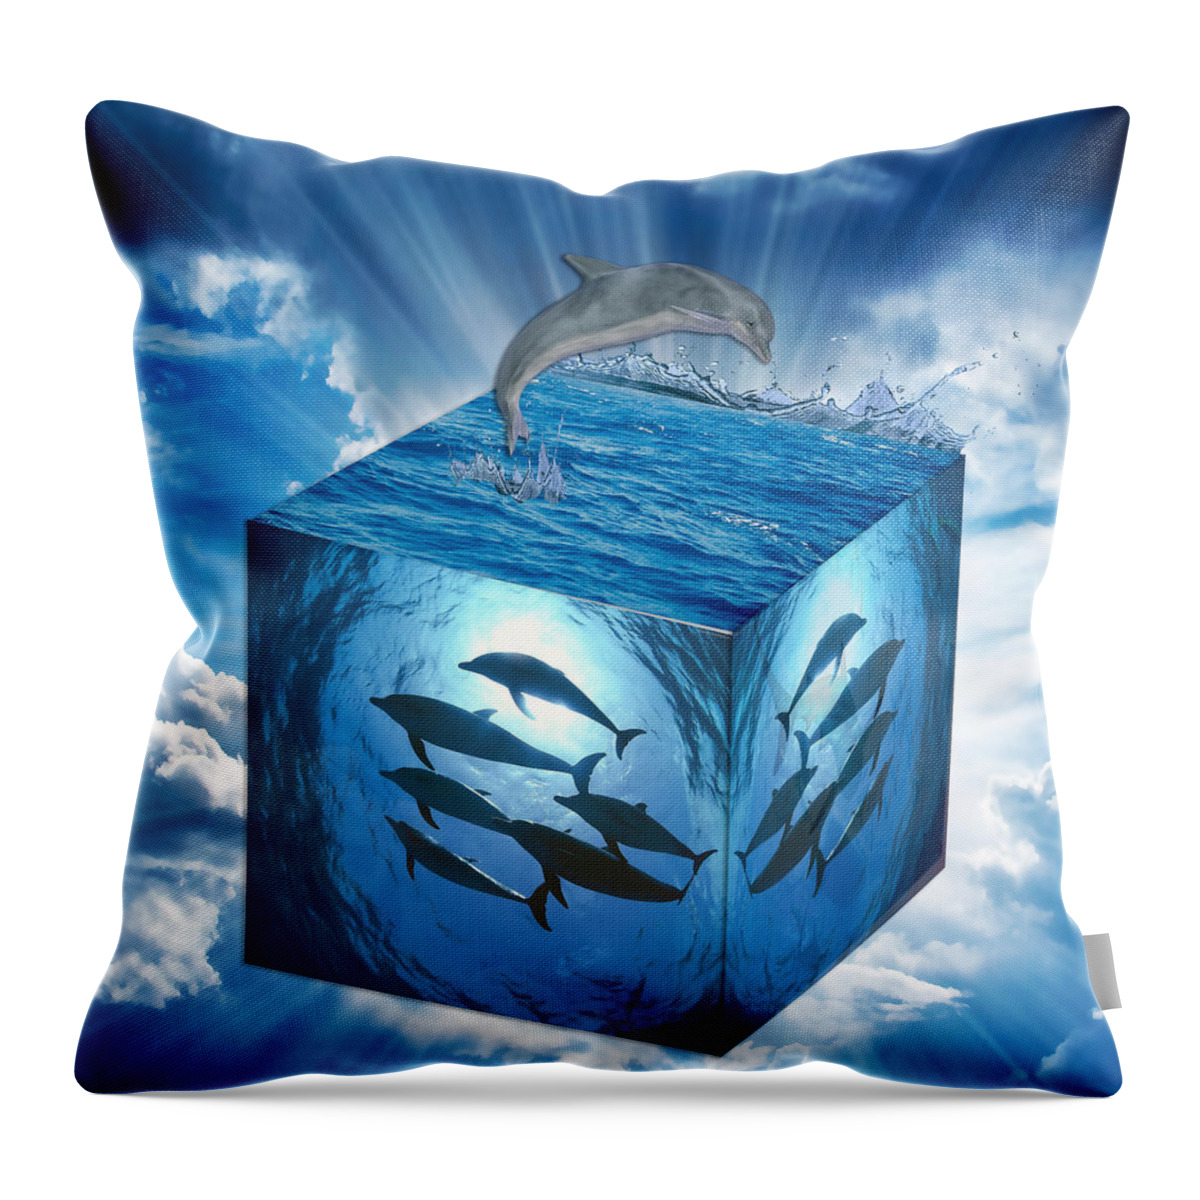 Fantasy Throw Pillow featuring the mixed media Dreaming Of Dolphins by Marvin Blaine